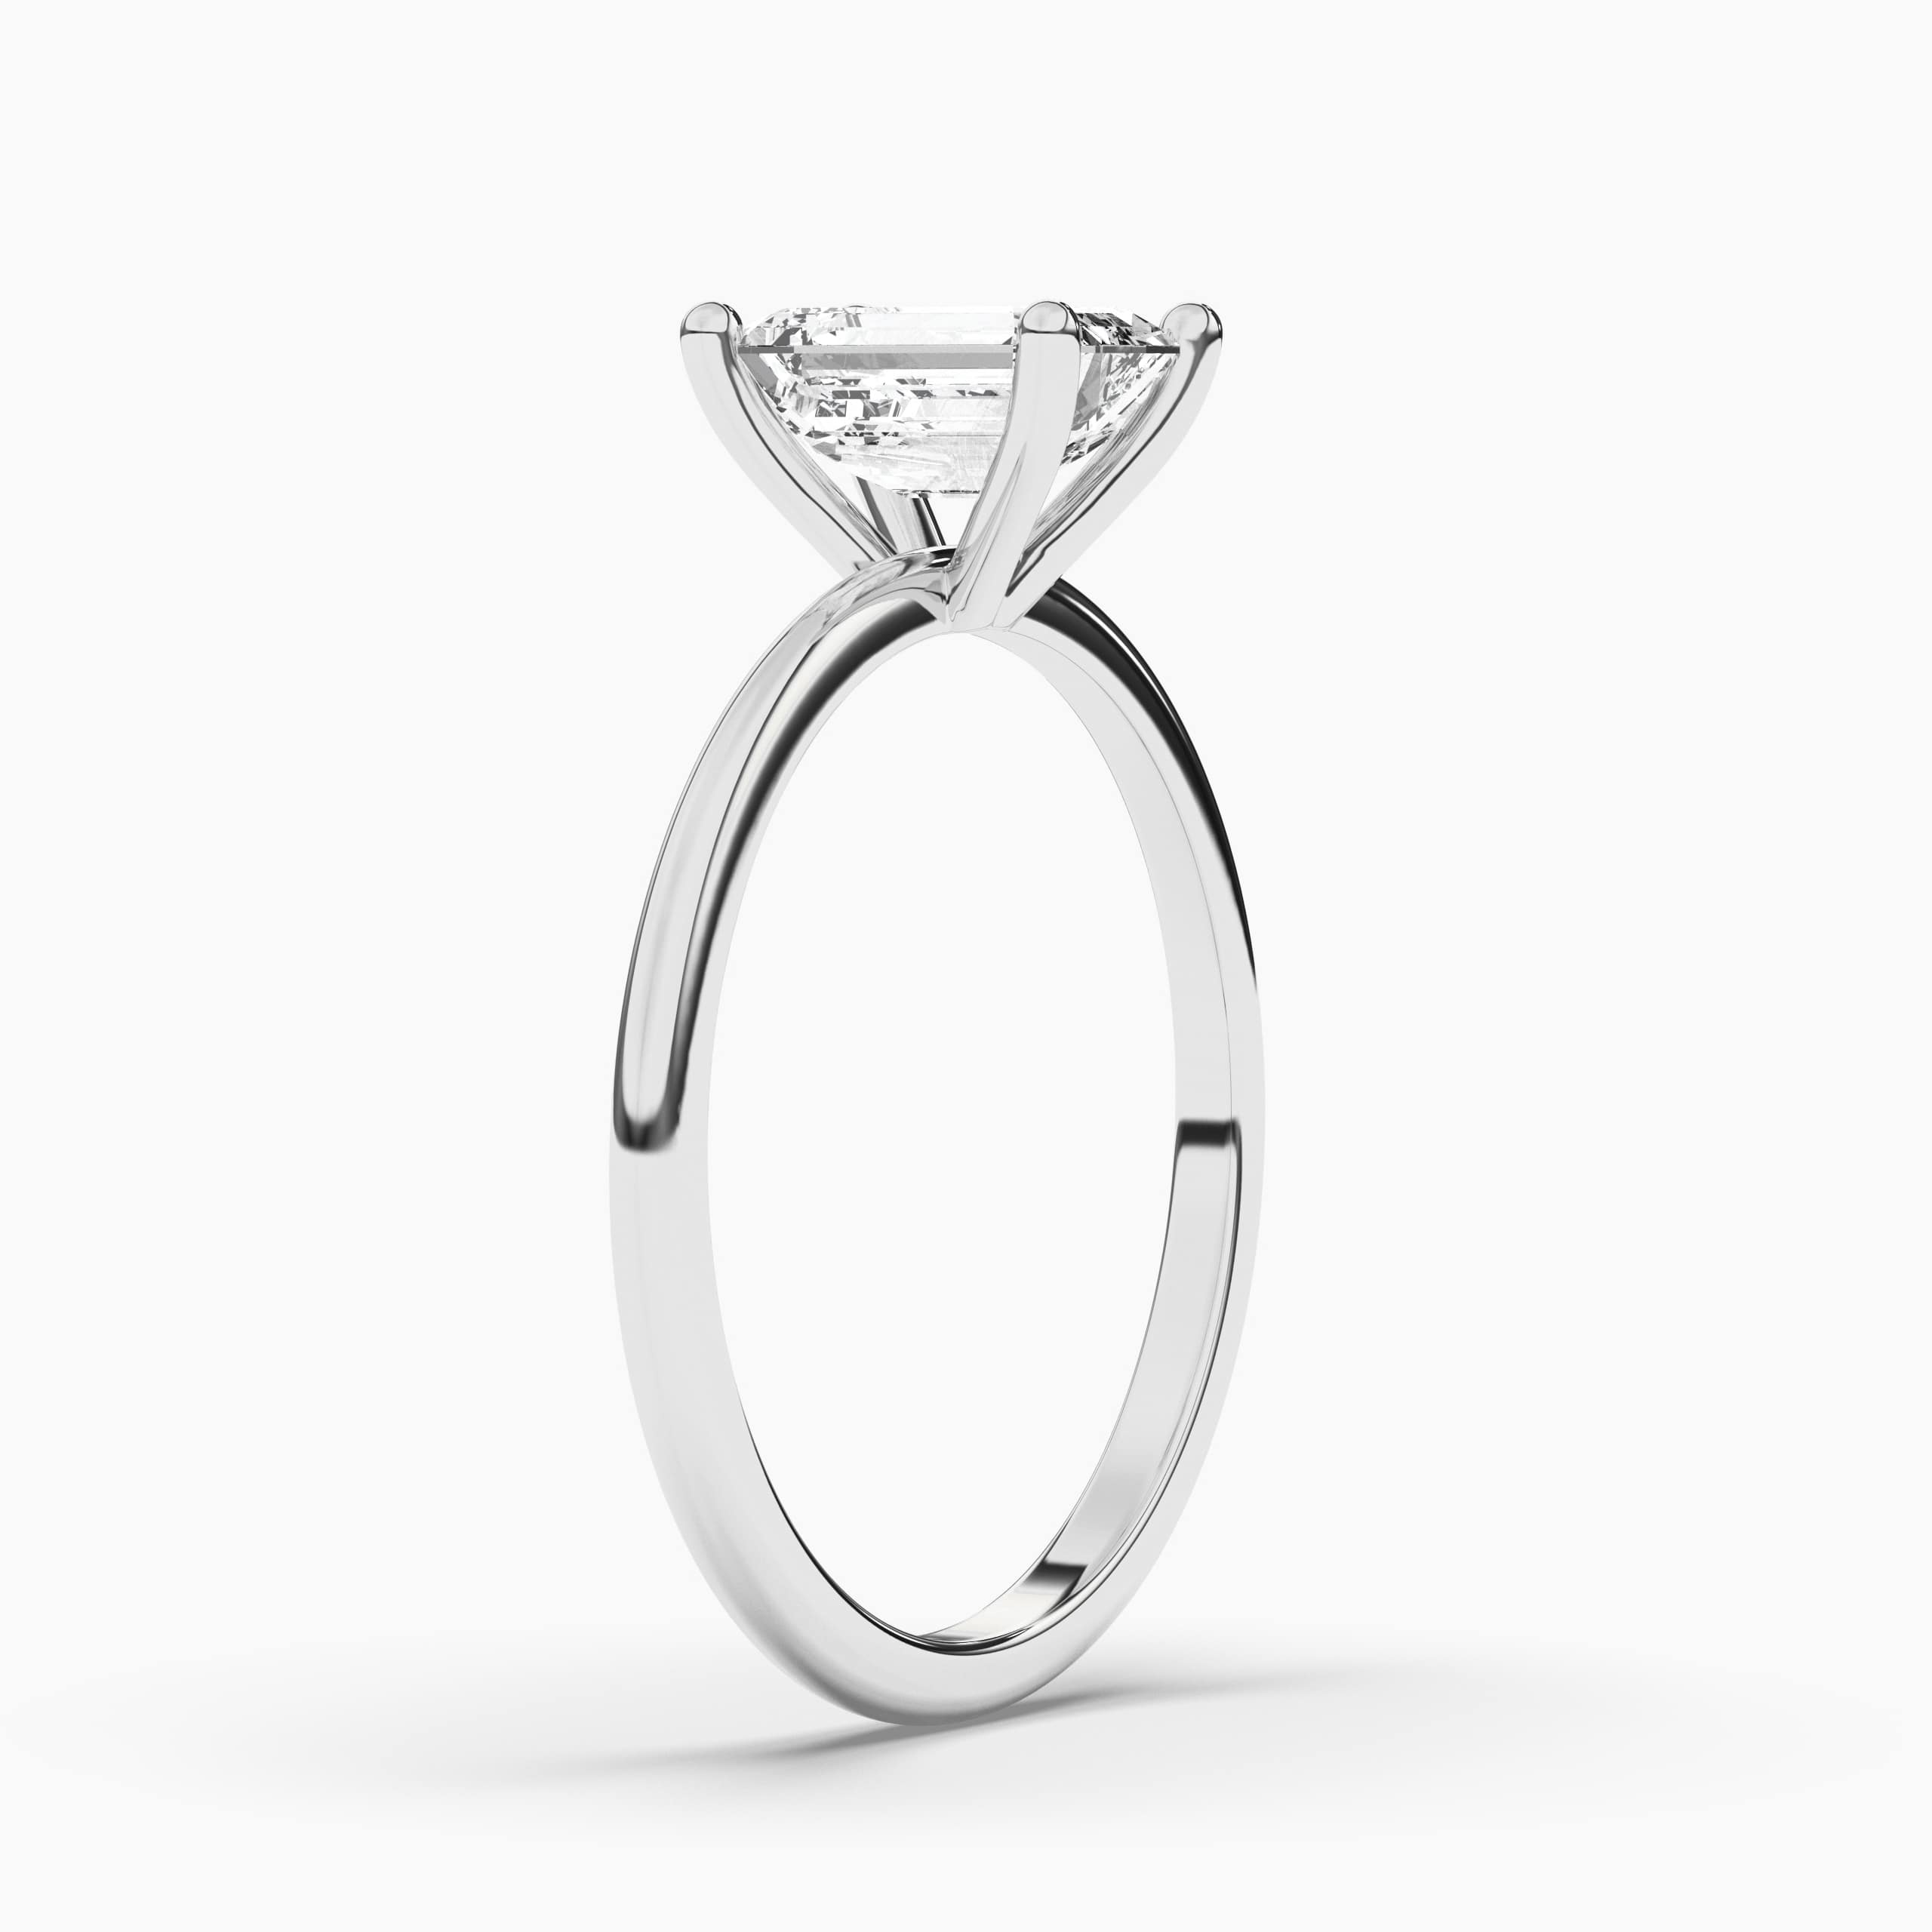 EMERALD CUT SOLITAIRE DIAMOND RING IN WHITE GOLD